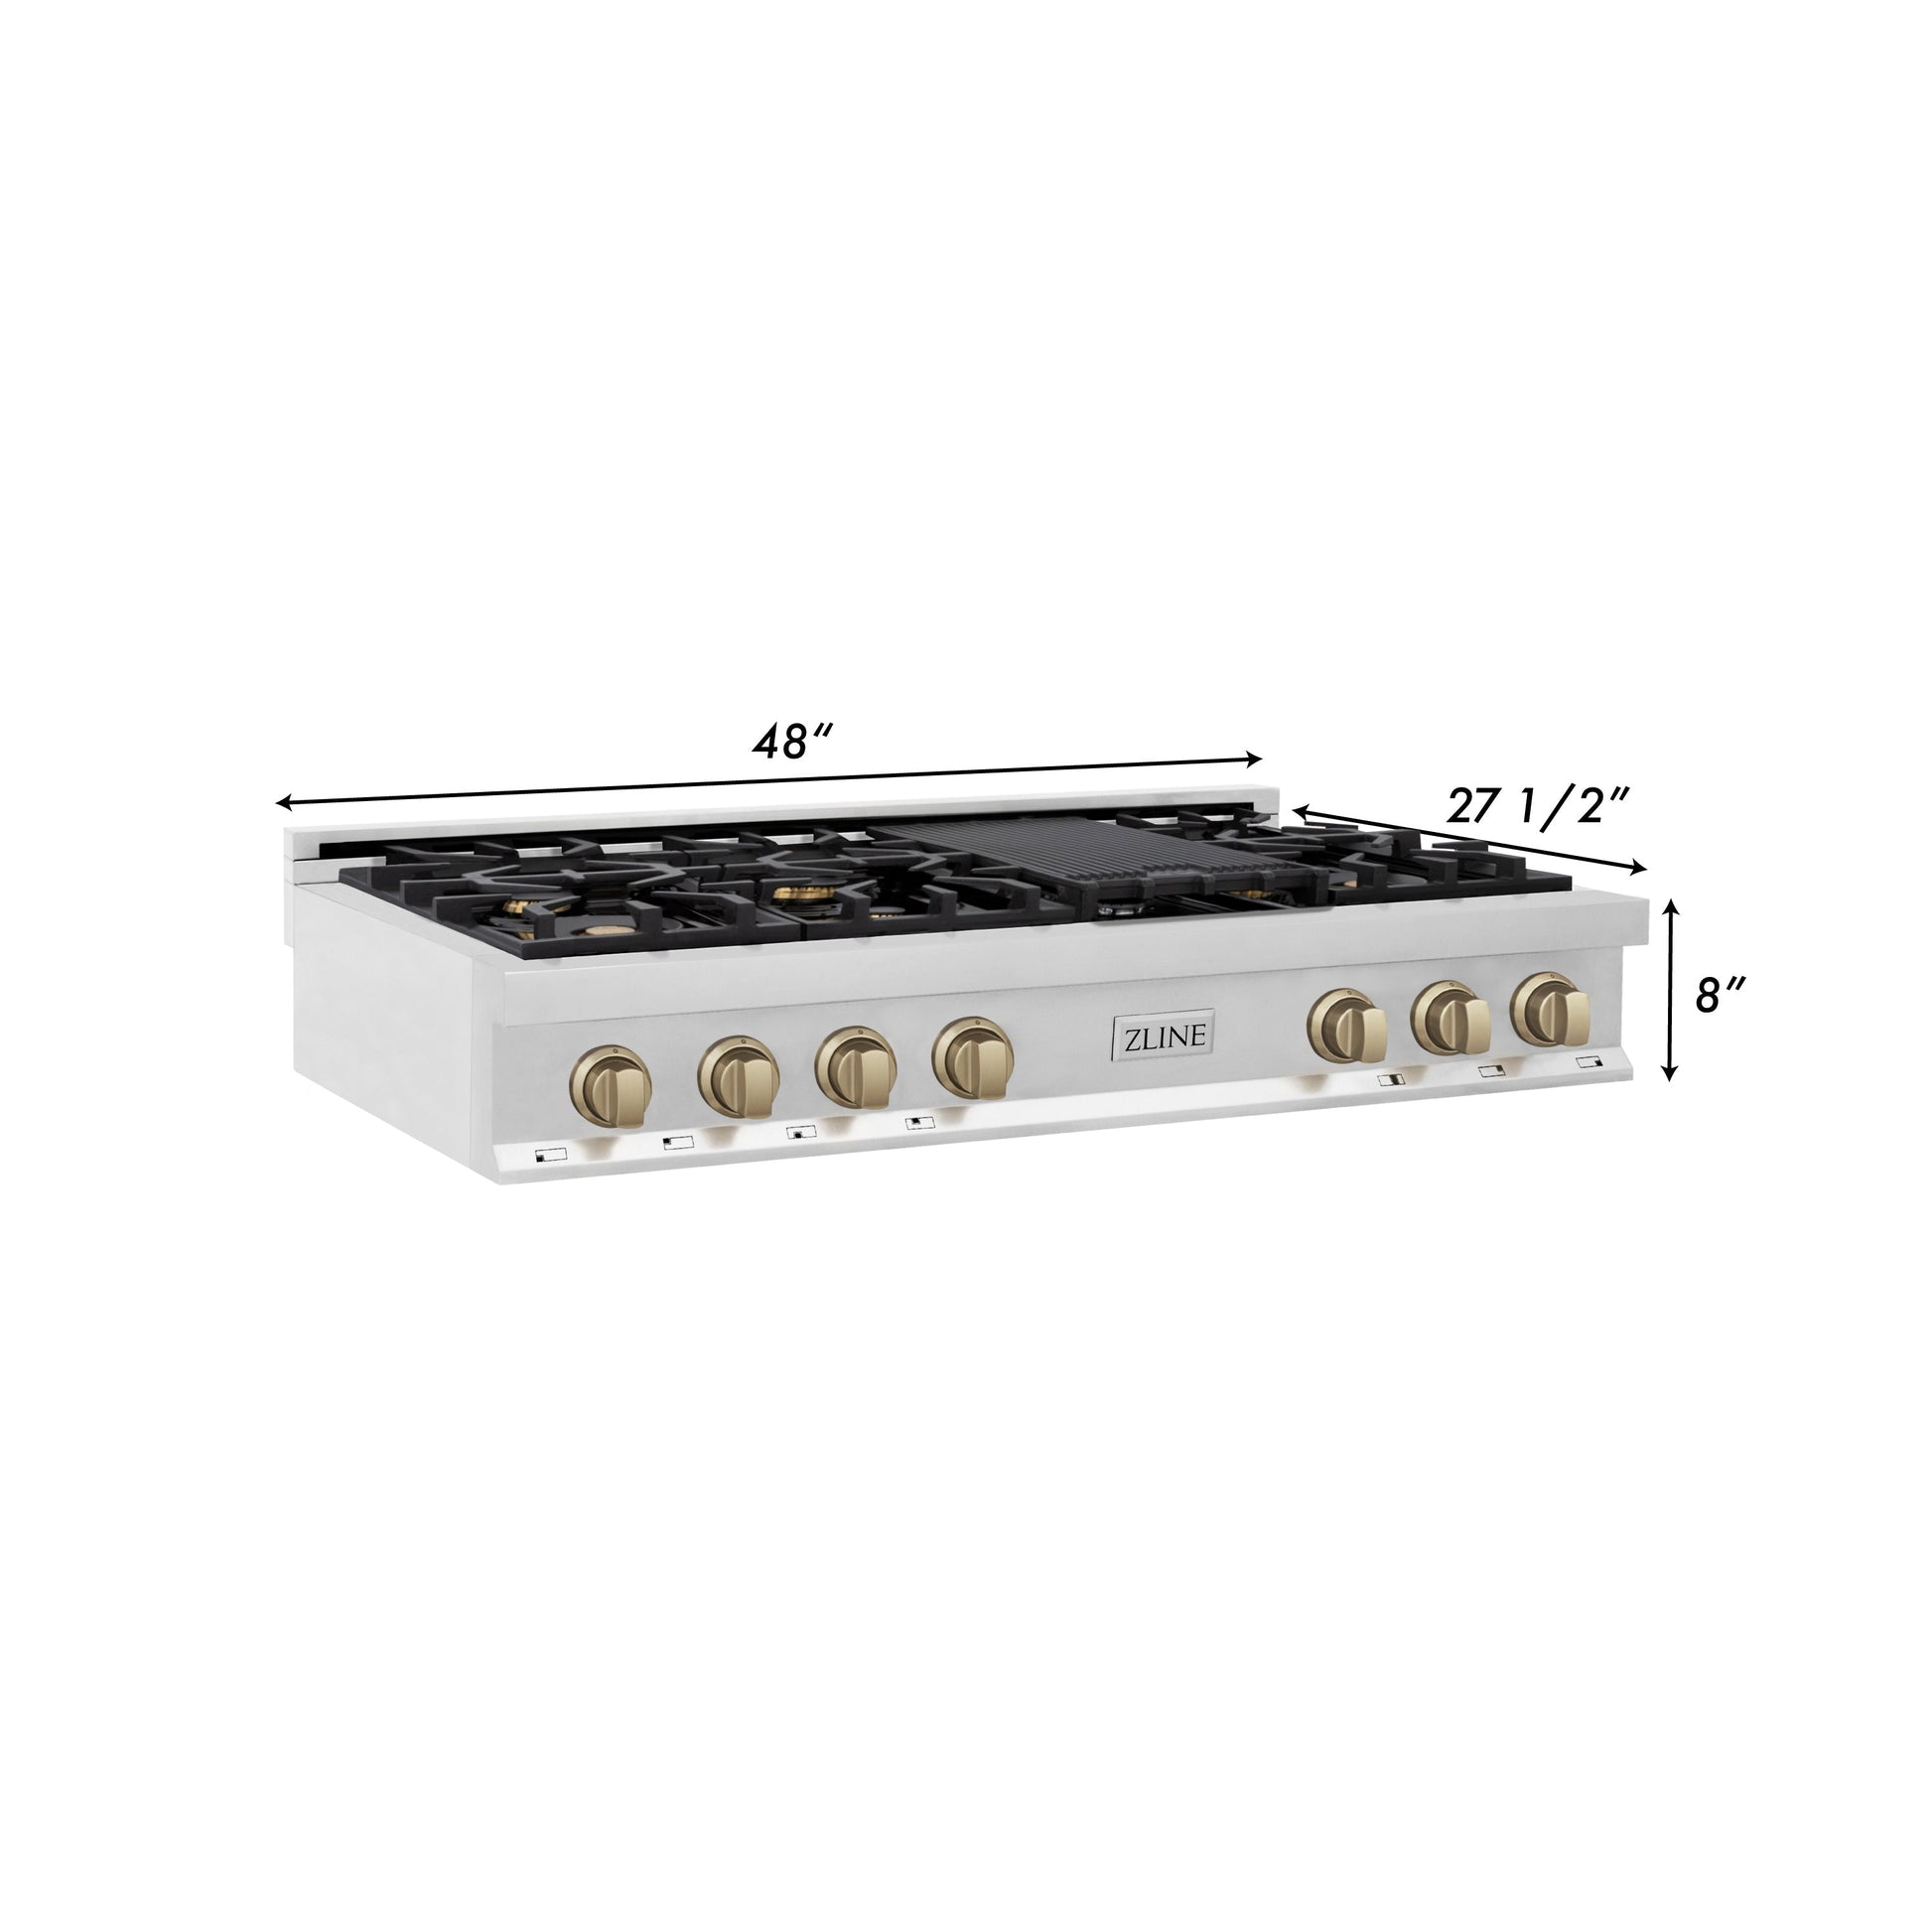 ZLINE Autograph Edition 48" Porcelain Rangetop with 7 Gas Burners - Stainless Steel with Accents